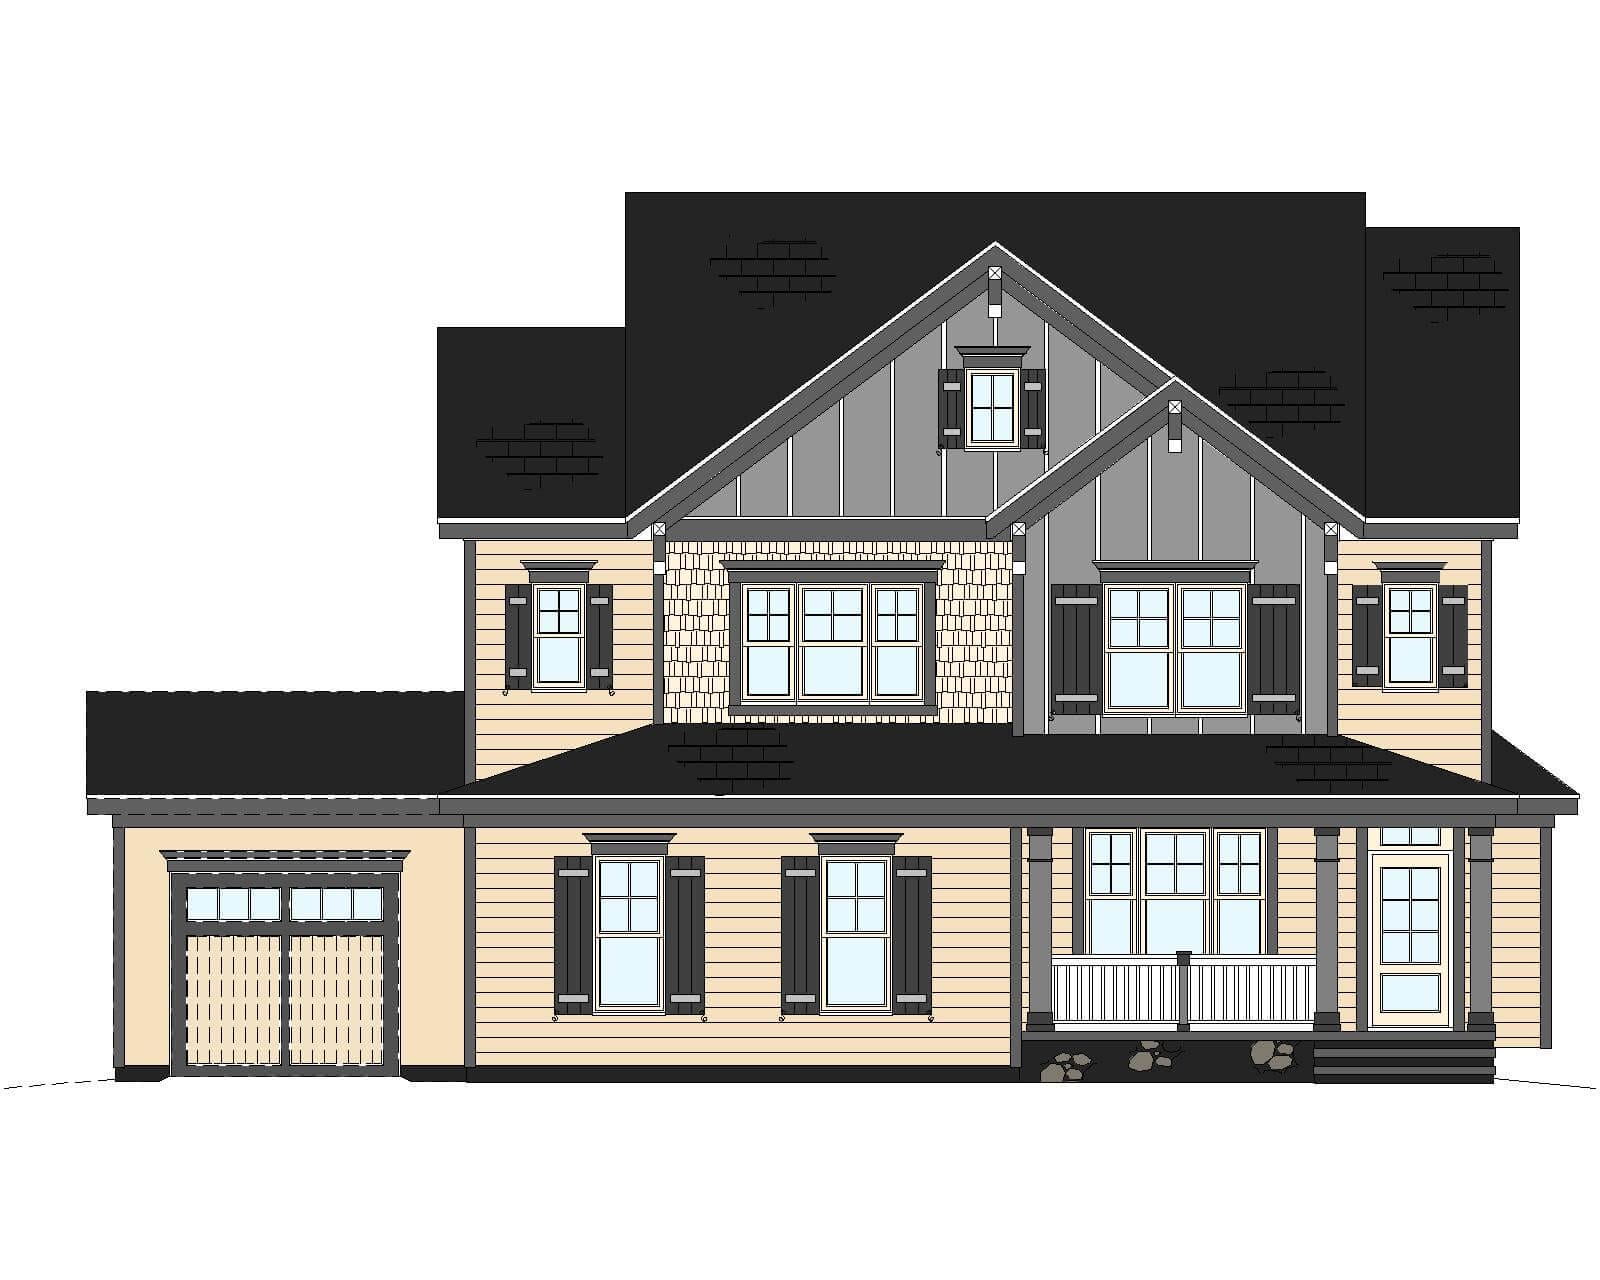 Architectural rendering of a two-story house featuring a combination of brick and siding, gable roofs, a large front porch, and an attached garage to the left. The structure includes multiple windows and 14-1145.